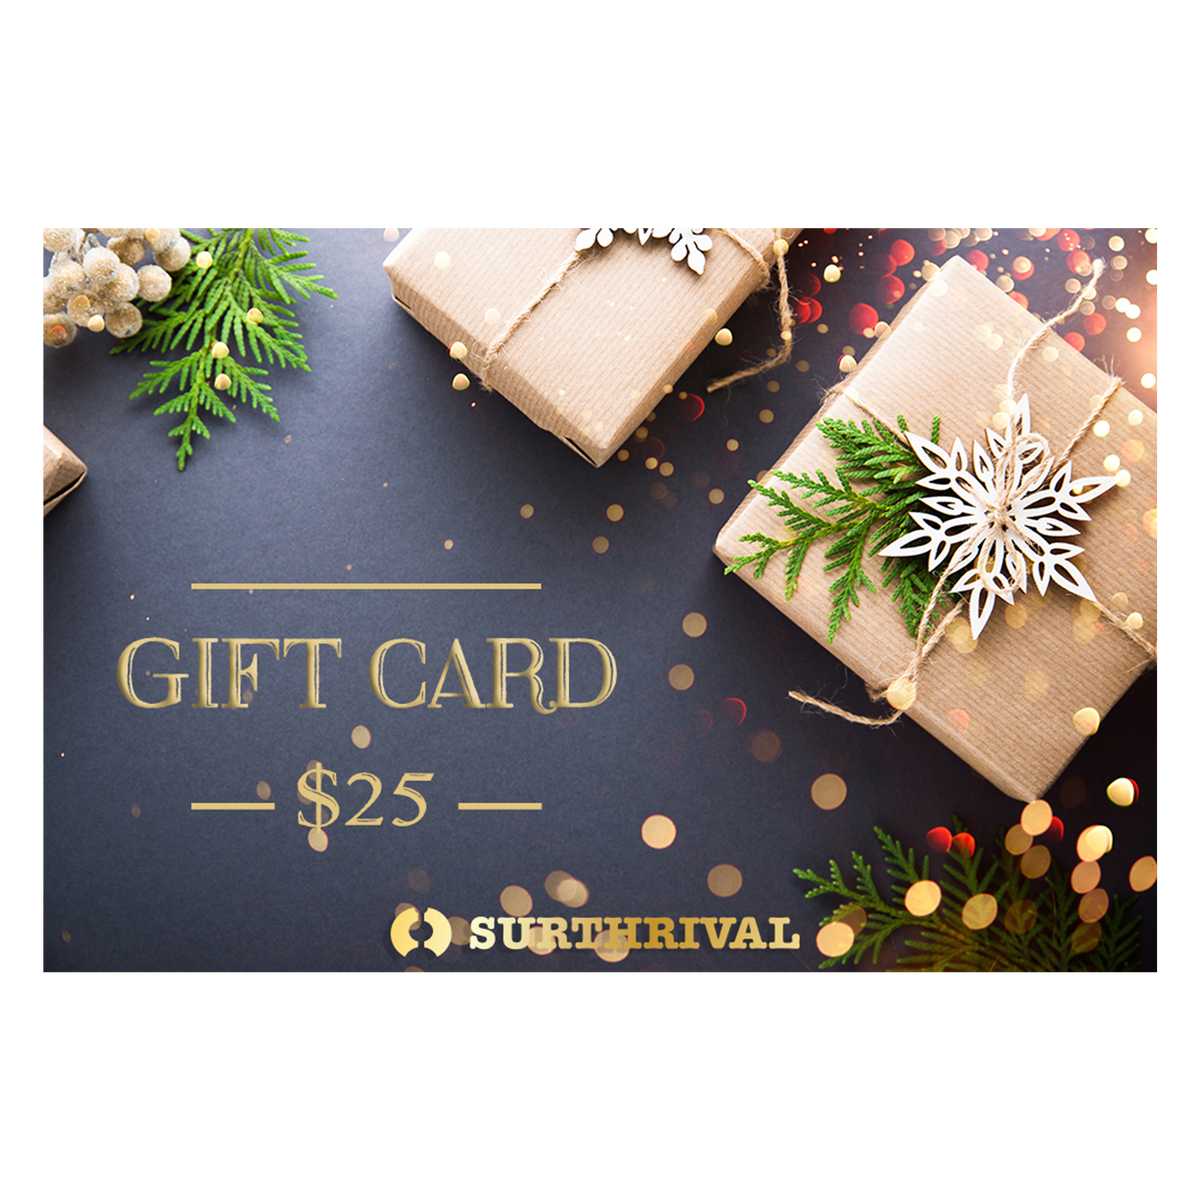 Surthrival Gift Card